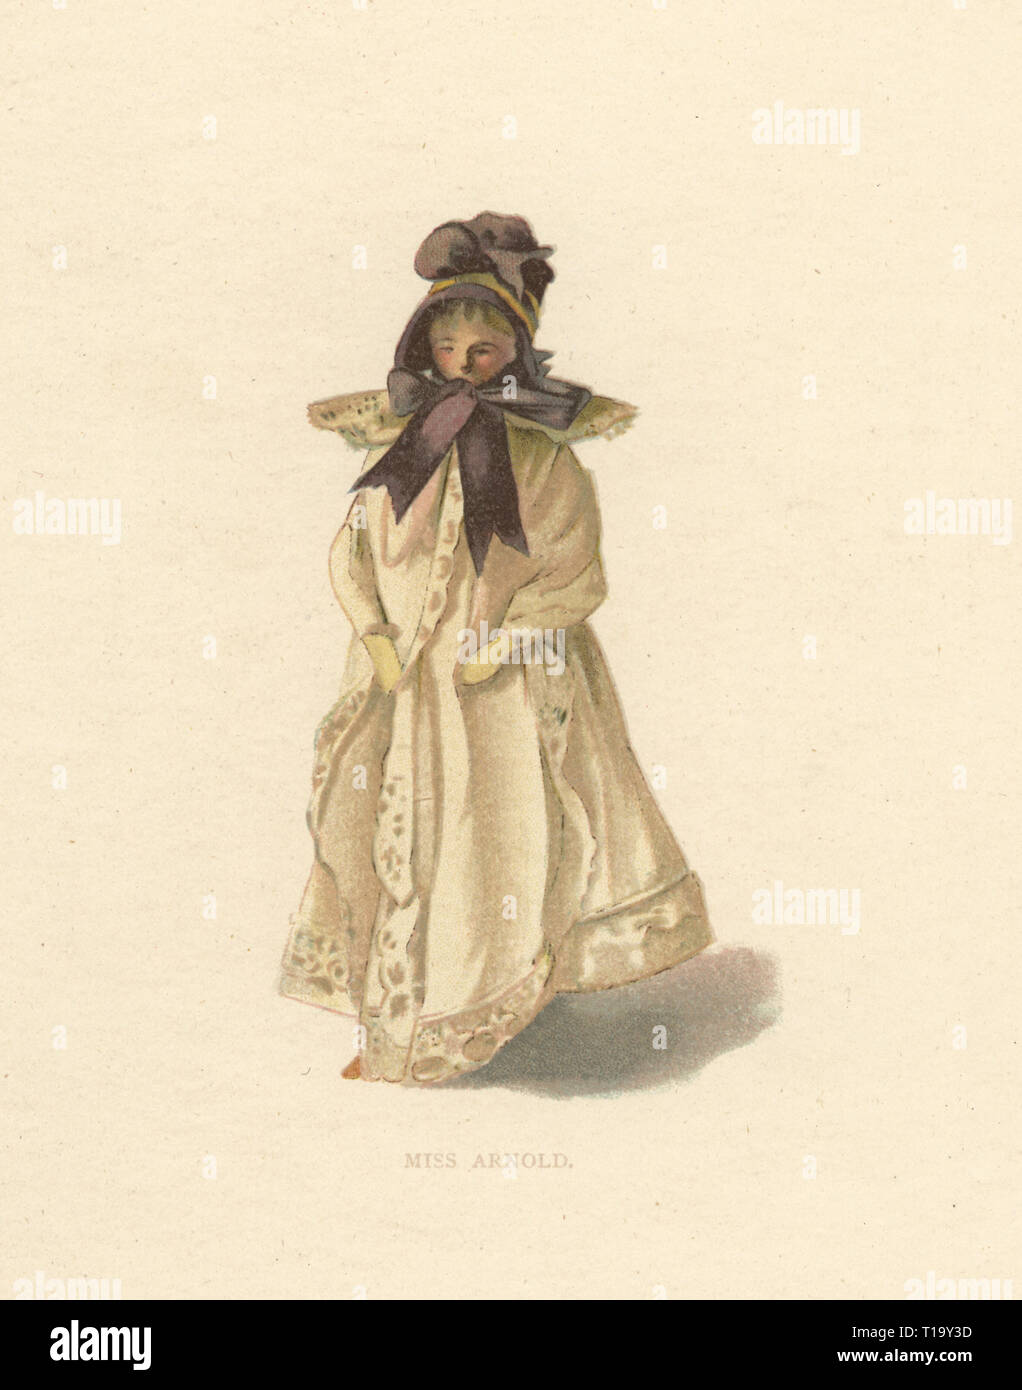 Doll representing Miss Arnold in poke bonnet, muslin frock, long fichu. Wooden doll dressed by the young Princess Victoria. Color plate after an illustration by Alan Wright from Frances H. Low’s Queen Victoria’s Dolls, George Newness, London, 1894. Stock Photo